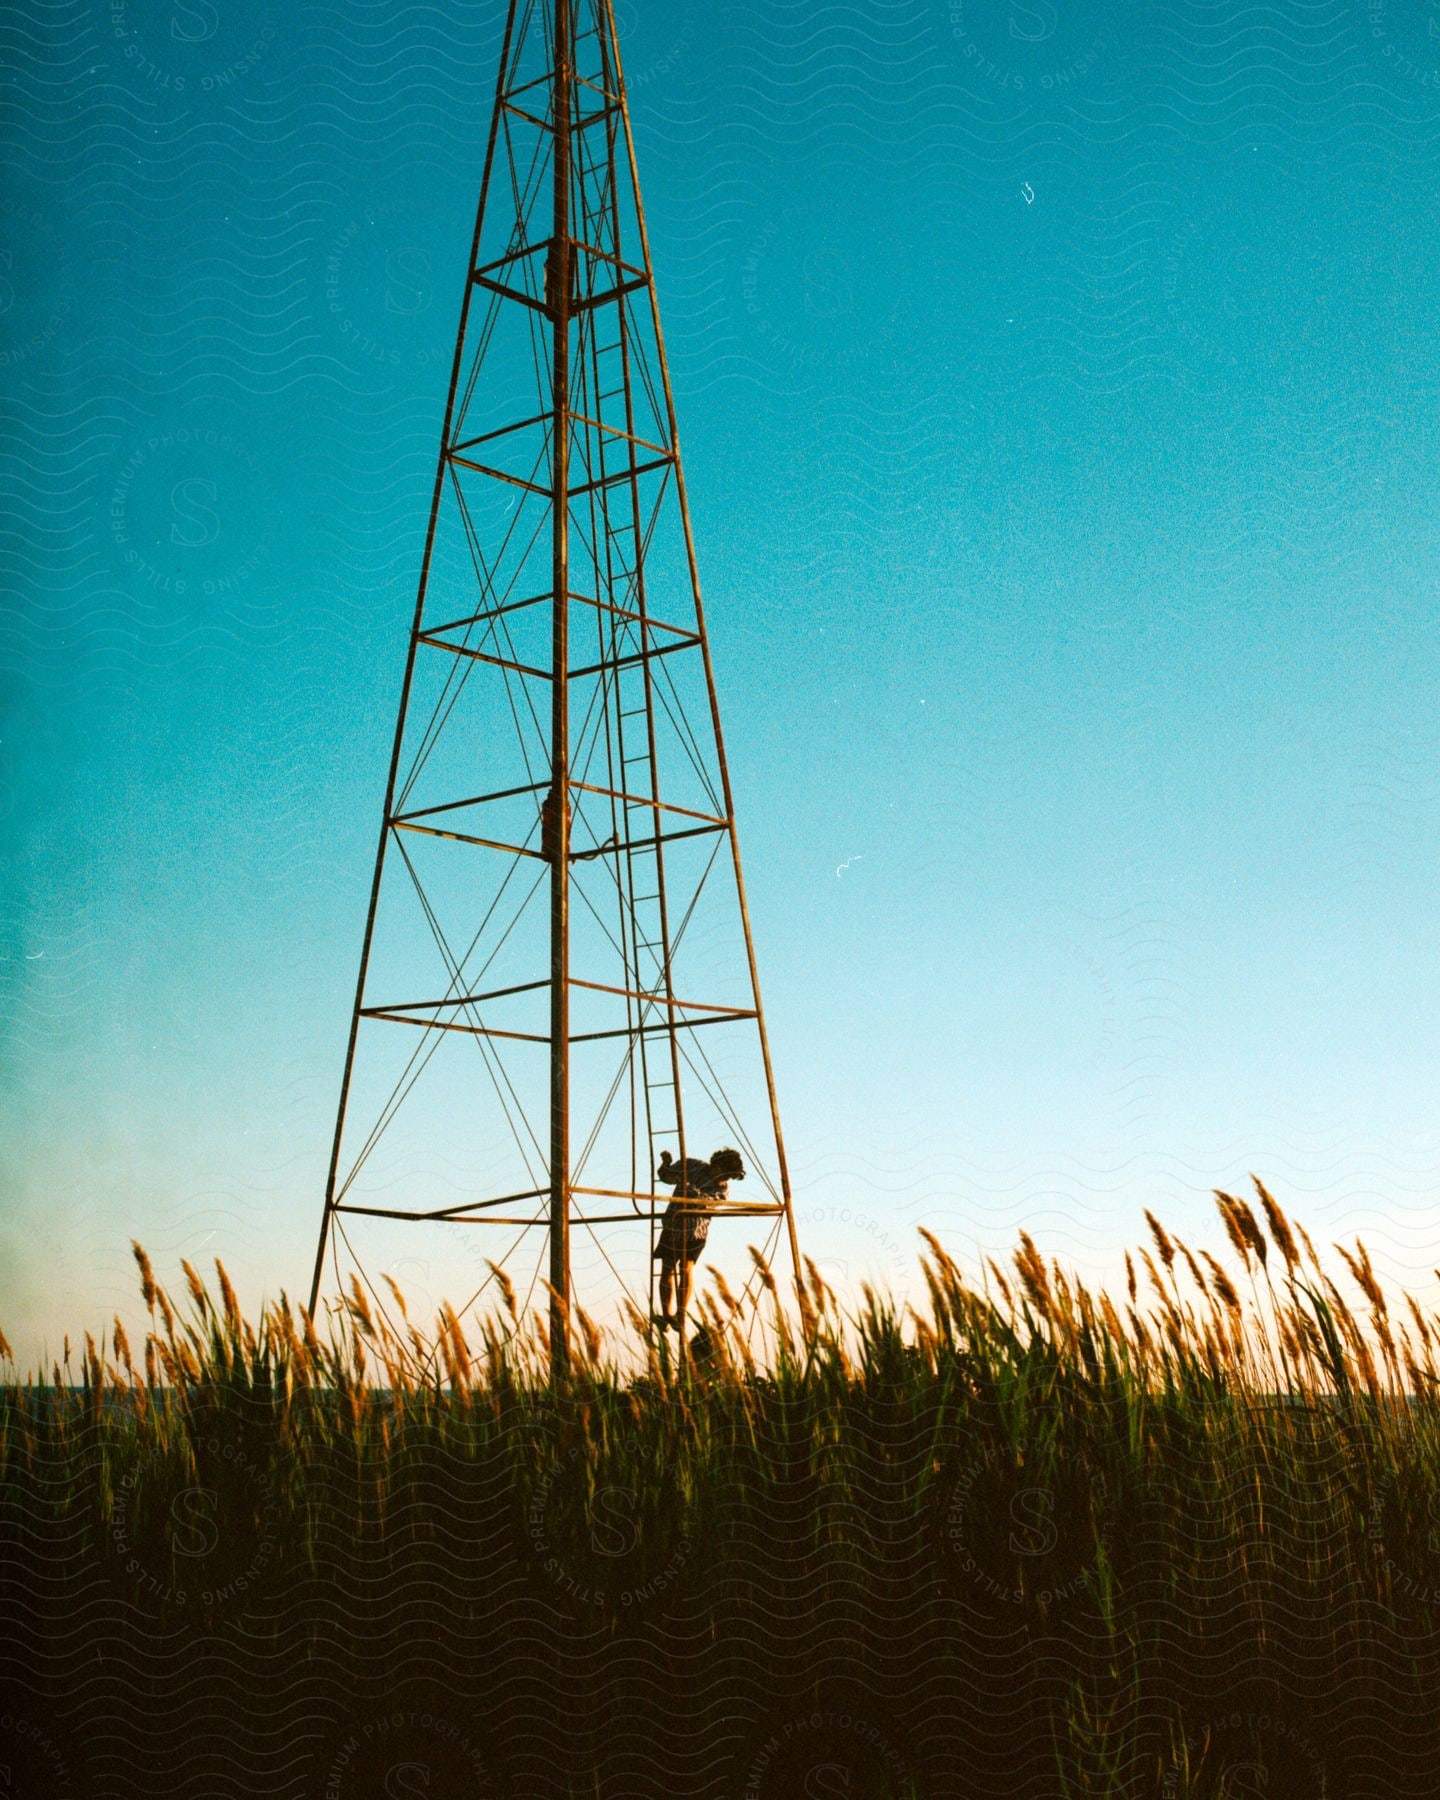 Stock photo of a man wearing shorts and a hat is standing on a utility tower ladder looking down